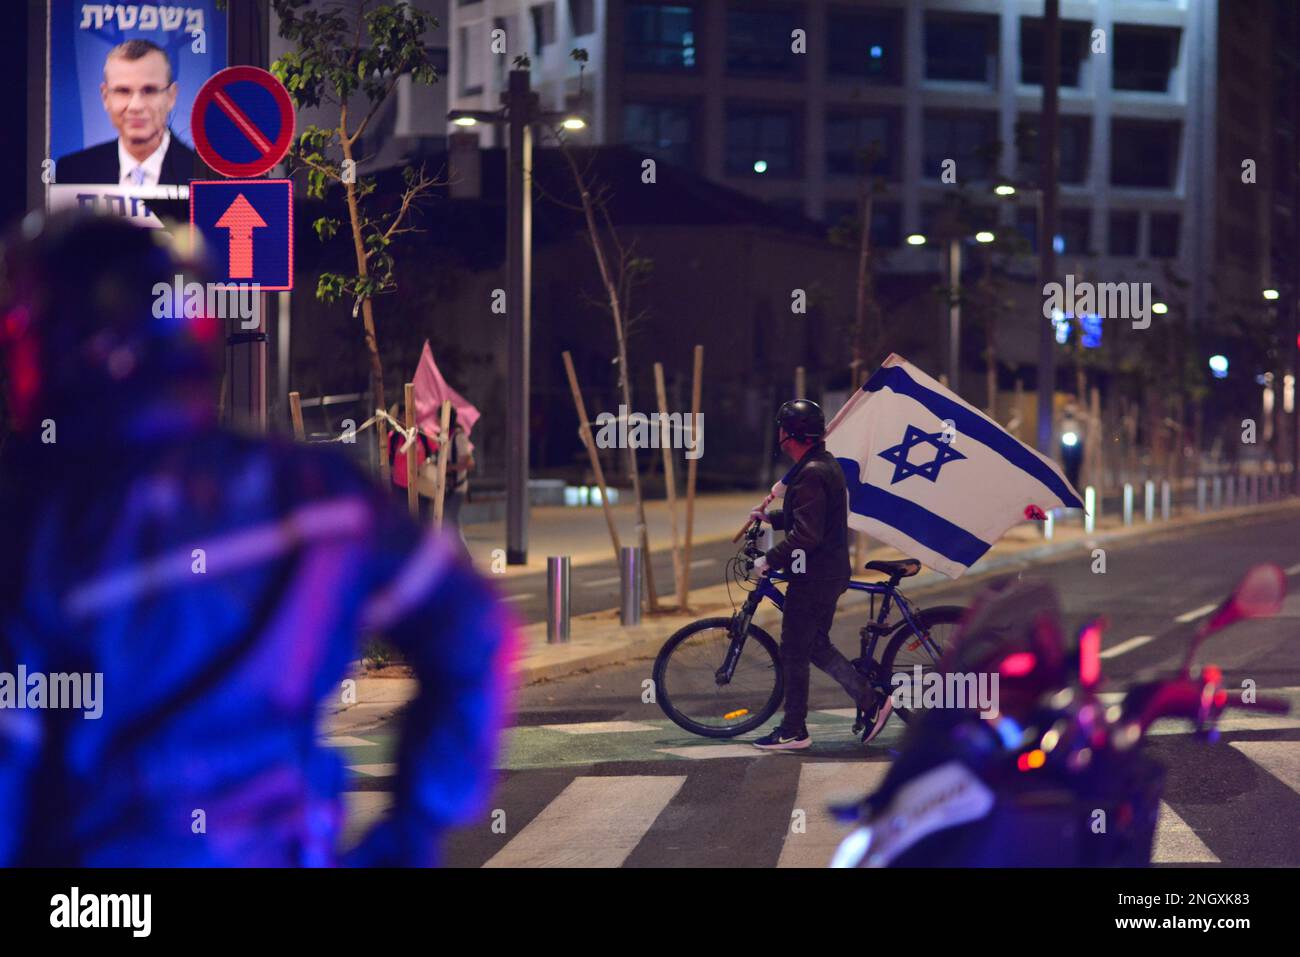 Israel. 18th Feb, 2023. A protestor against the reform next to an urban signboard in support with Yariv Levin, Israeli minister of justice. Over 120,000 people protested in Tel Aviv against Netanyahu's far-right government and its controversial legal reform. Feb 18th 2023. (Photo by Matan Golan/Sipa USA). Credit: Sipa USA/Alamy Live News Stock Photo